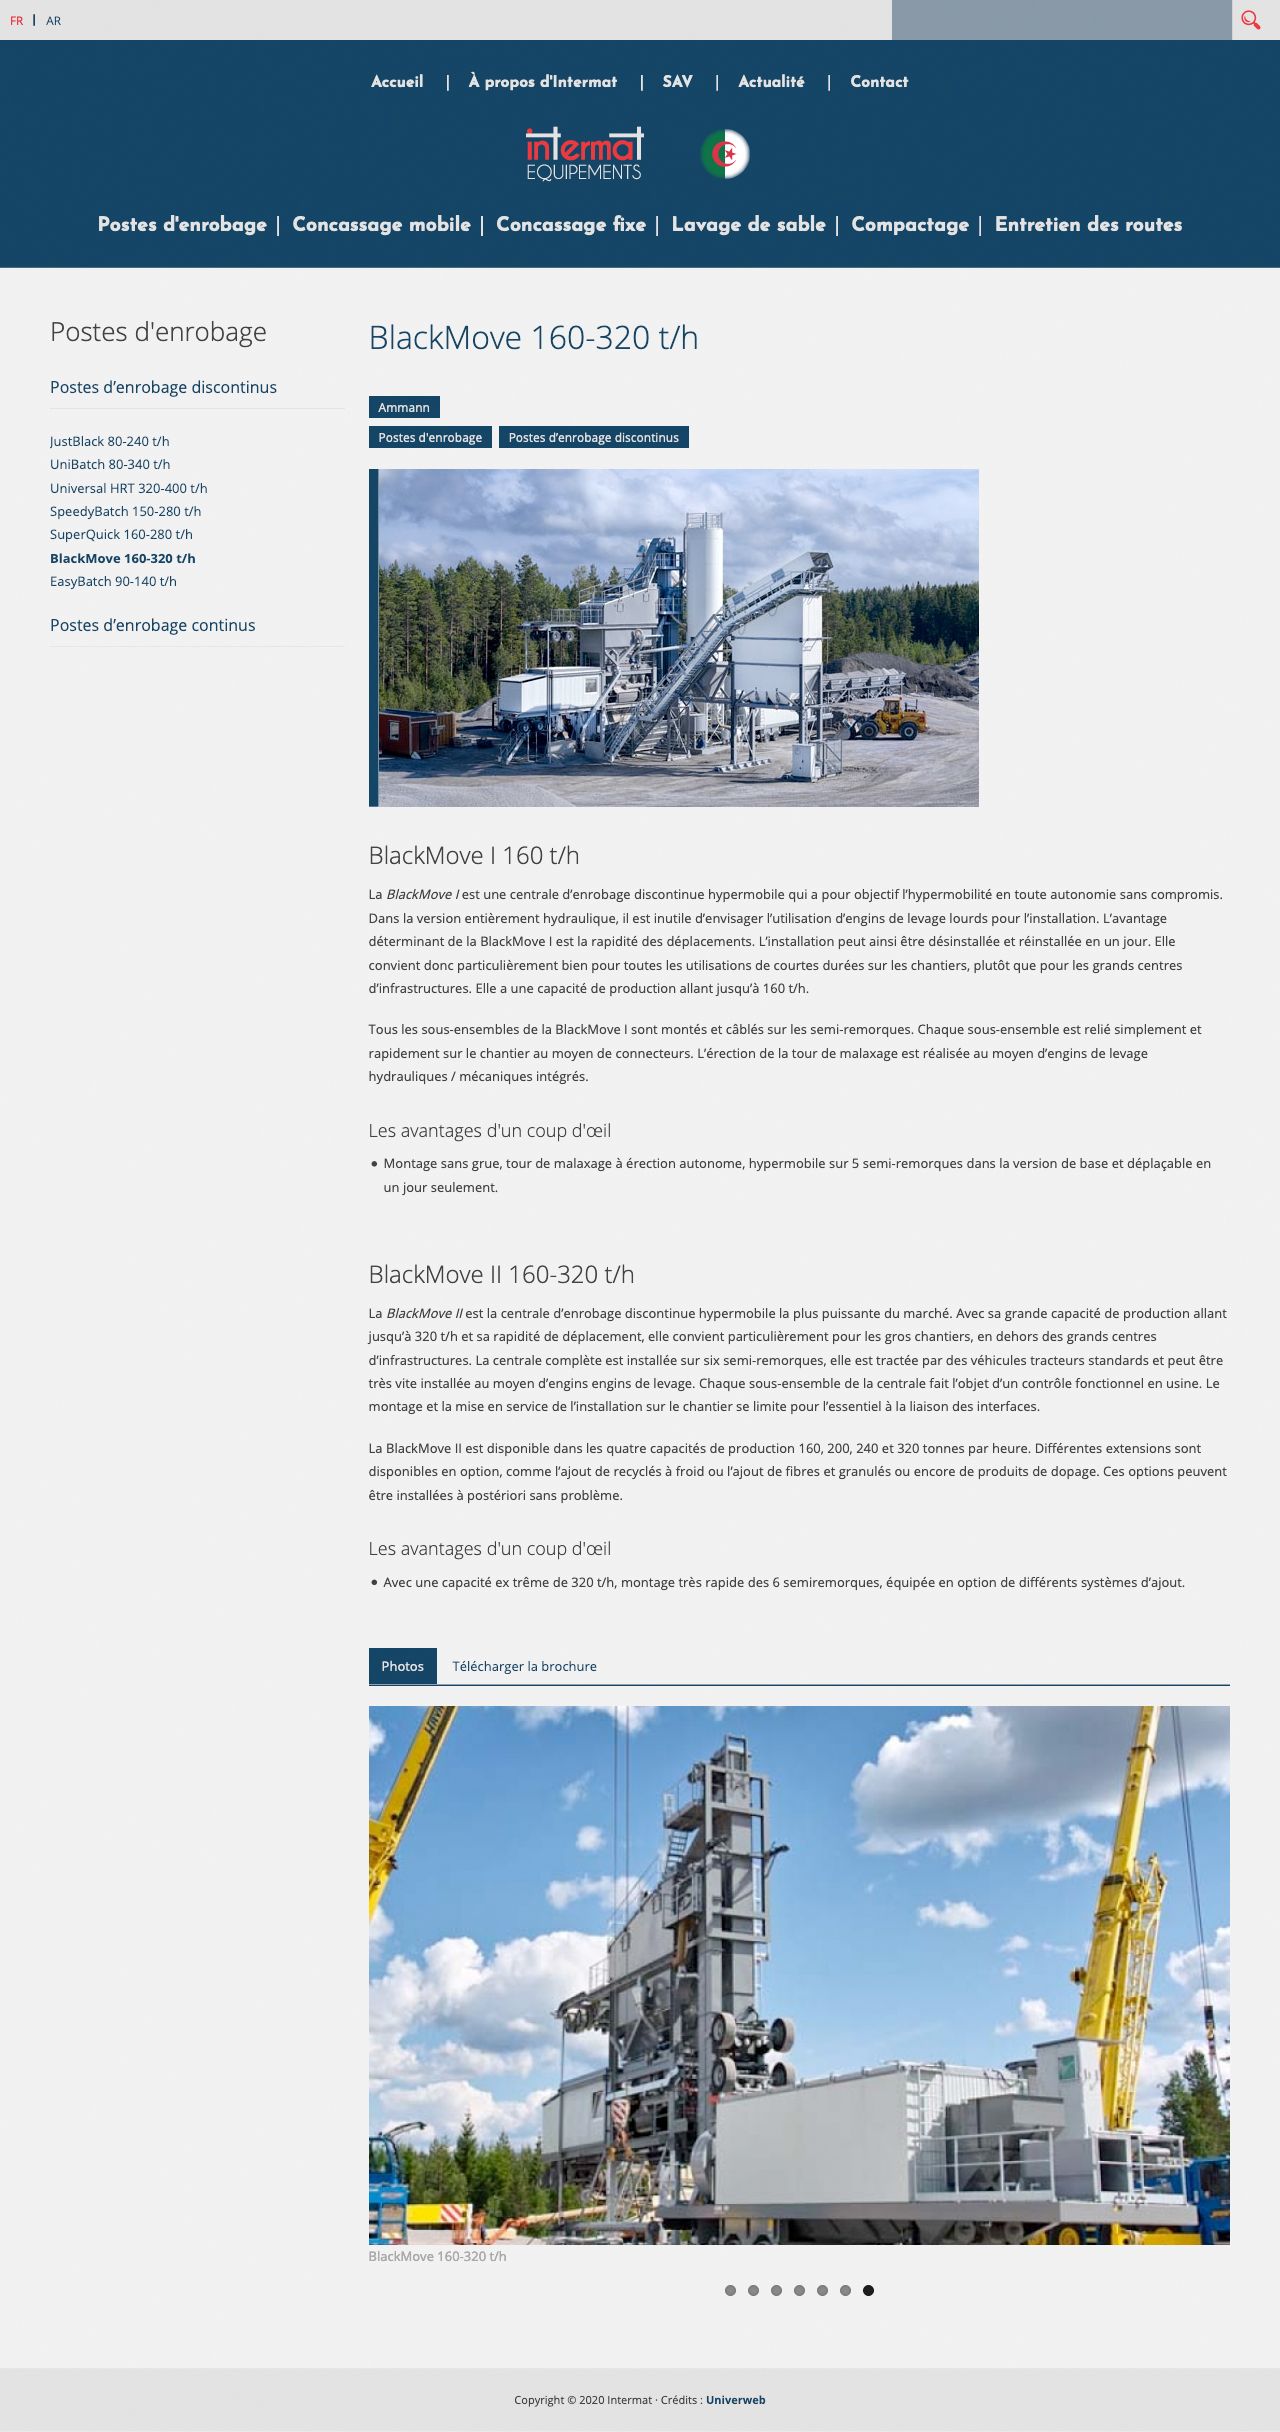 A website overview of Intermat